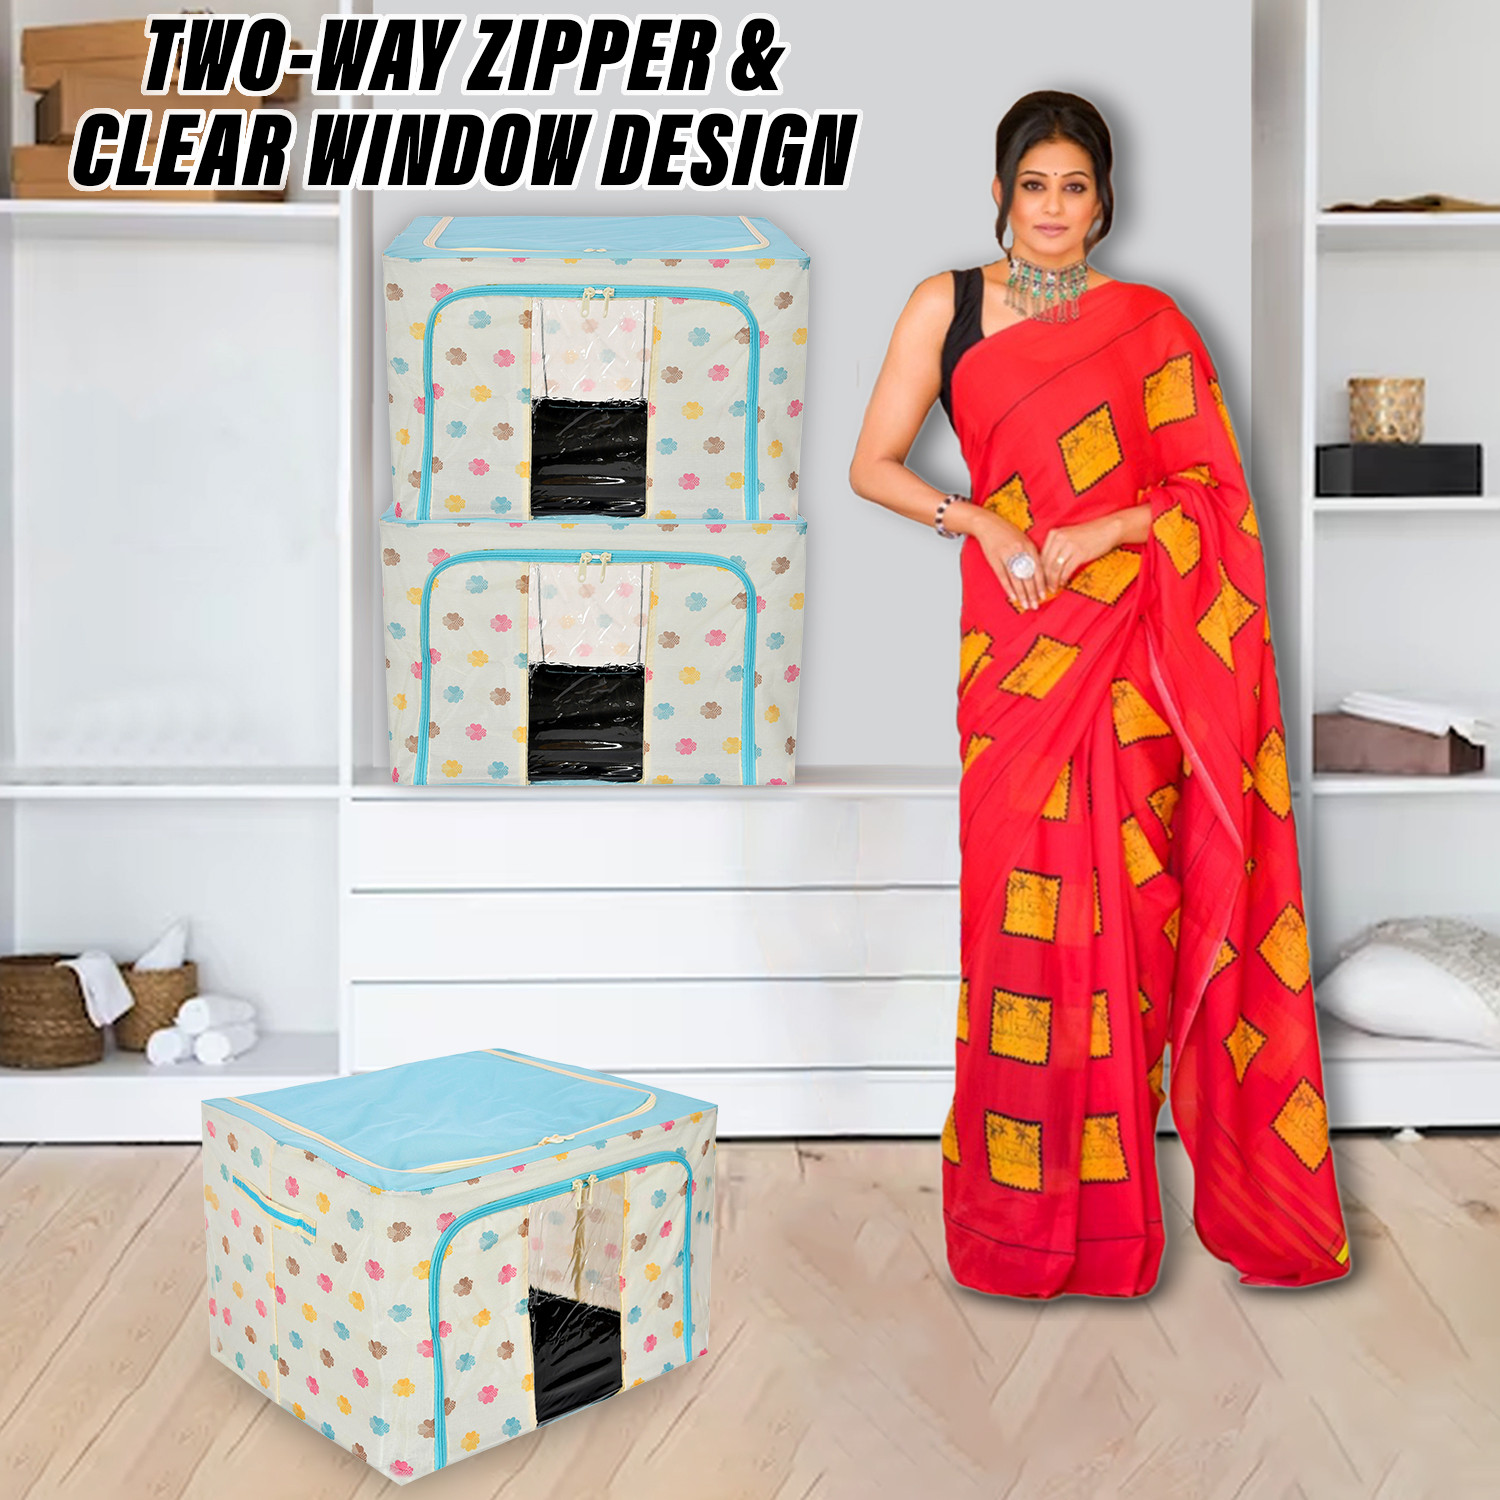 Kuber Industries Storage Box | Steel Frame Living Box | Storage Organizer For Clothes | Saree Cover for Woman | Multi Flower Print Cloth Organizer | 66 Liter | Sky Blue